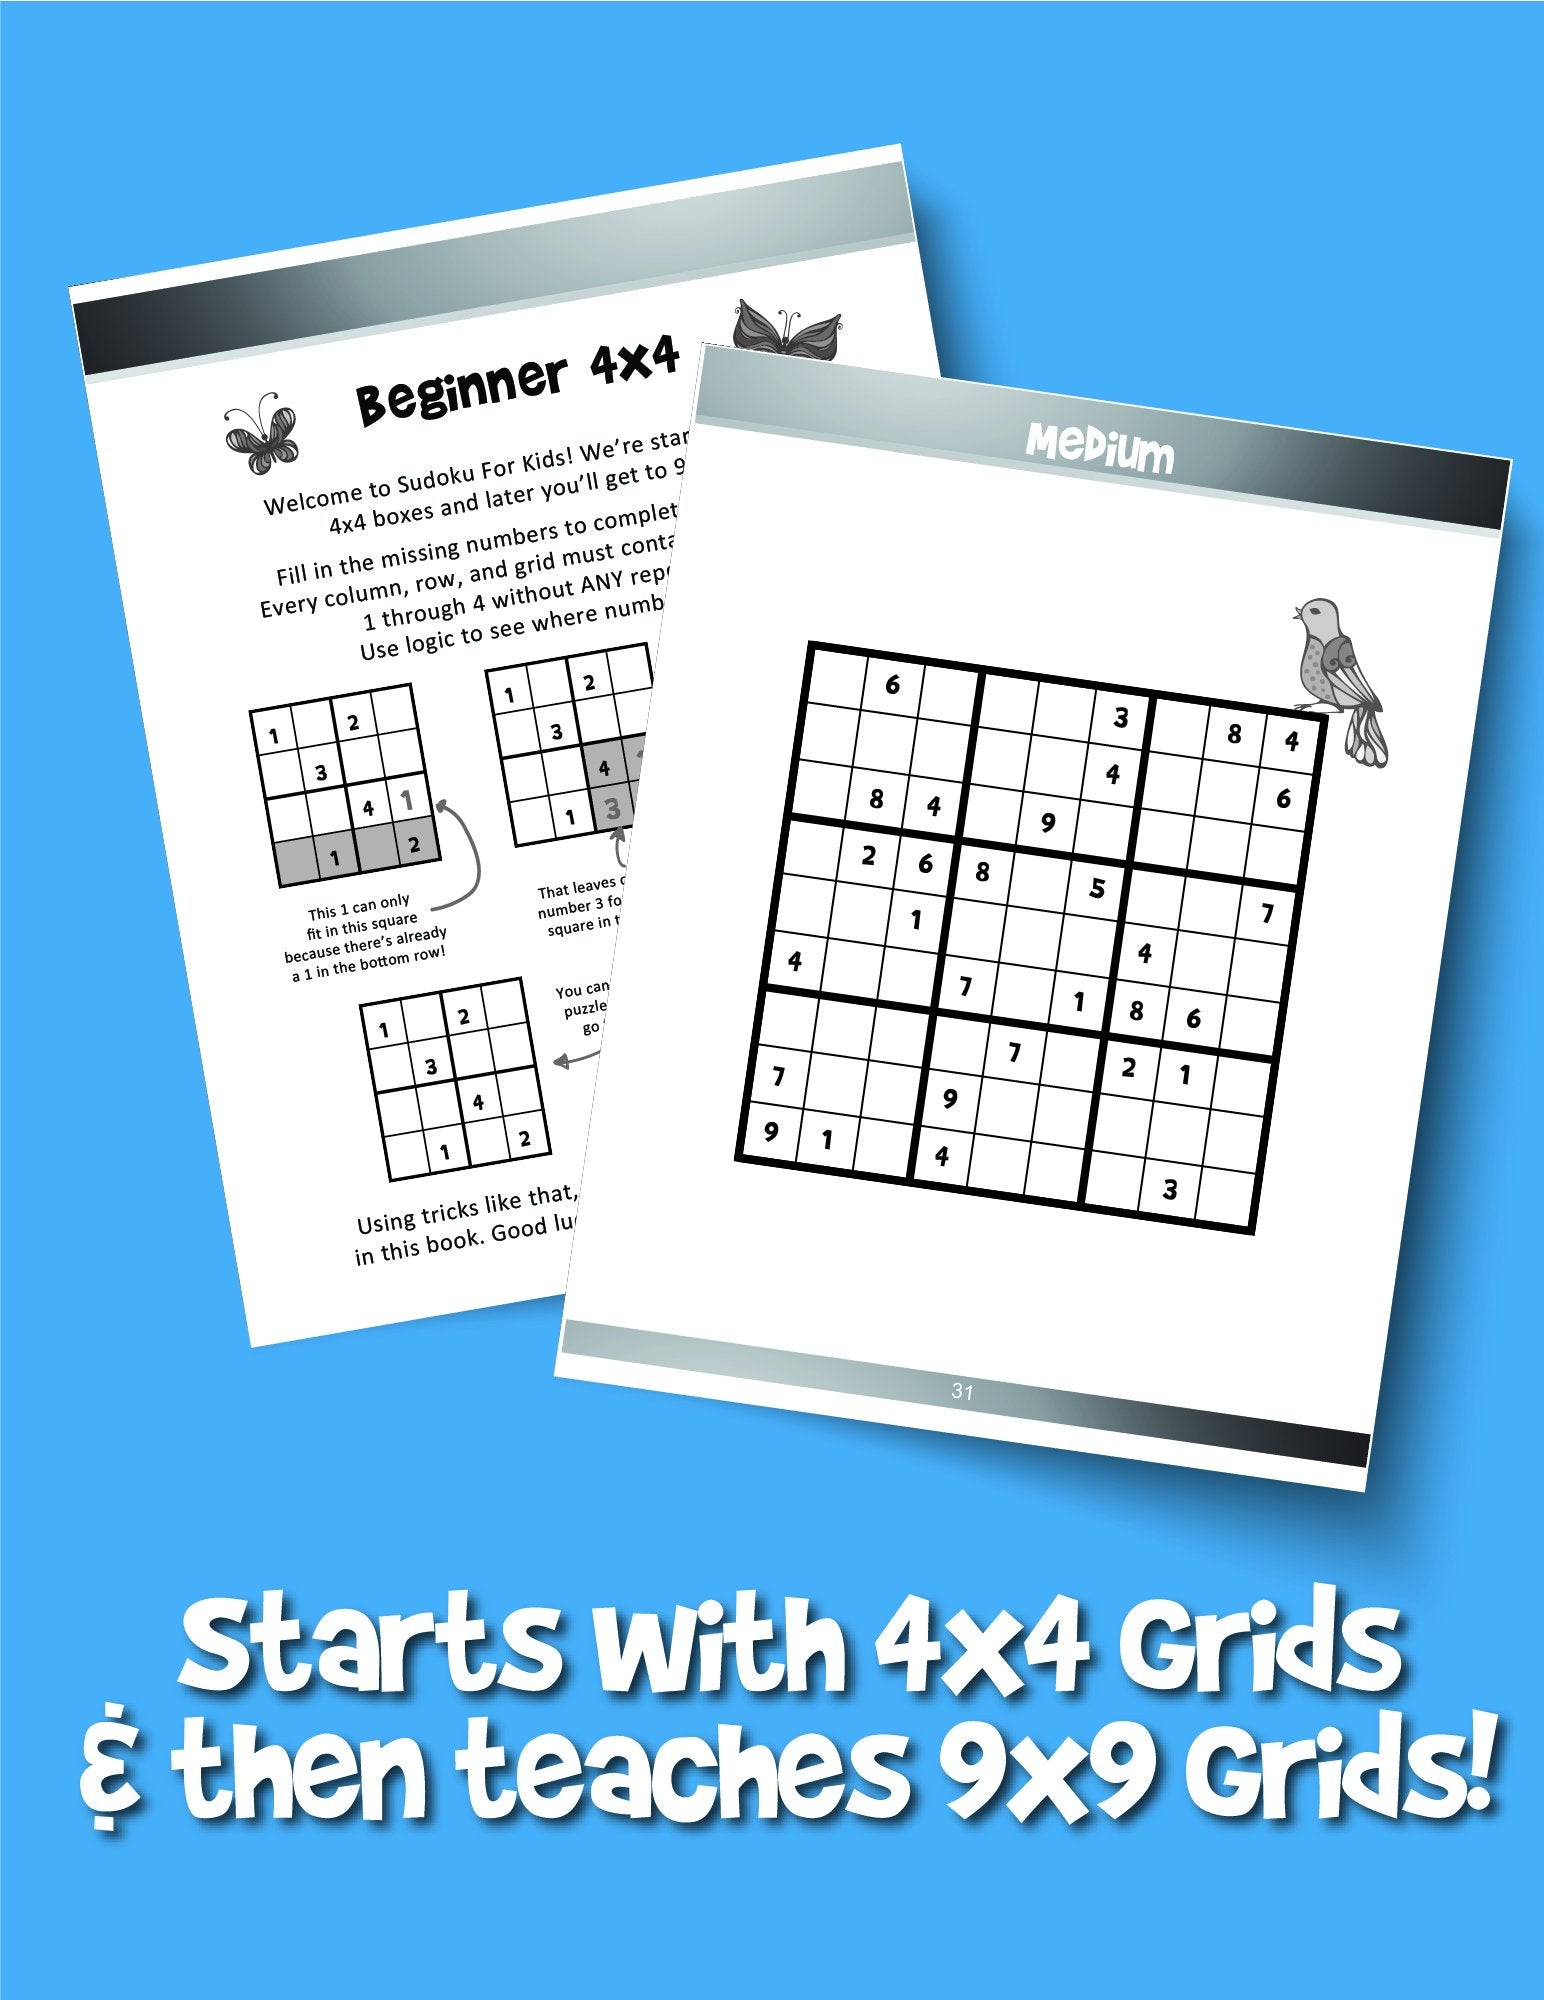 The Big Book of Kindergarten Sudoku : 4x4 Sudoku and Wordoku Puzzles for  Kids by J. Green (2017, Trade Paperback) for sale online